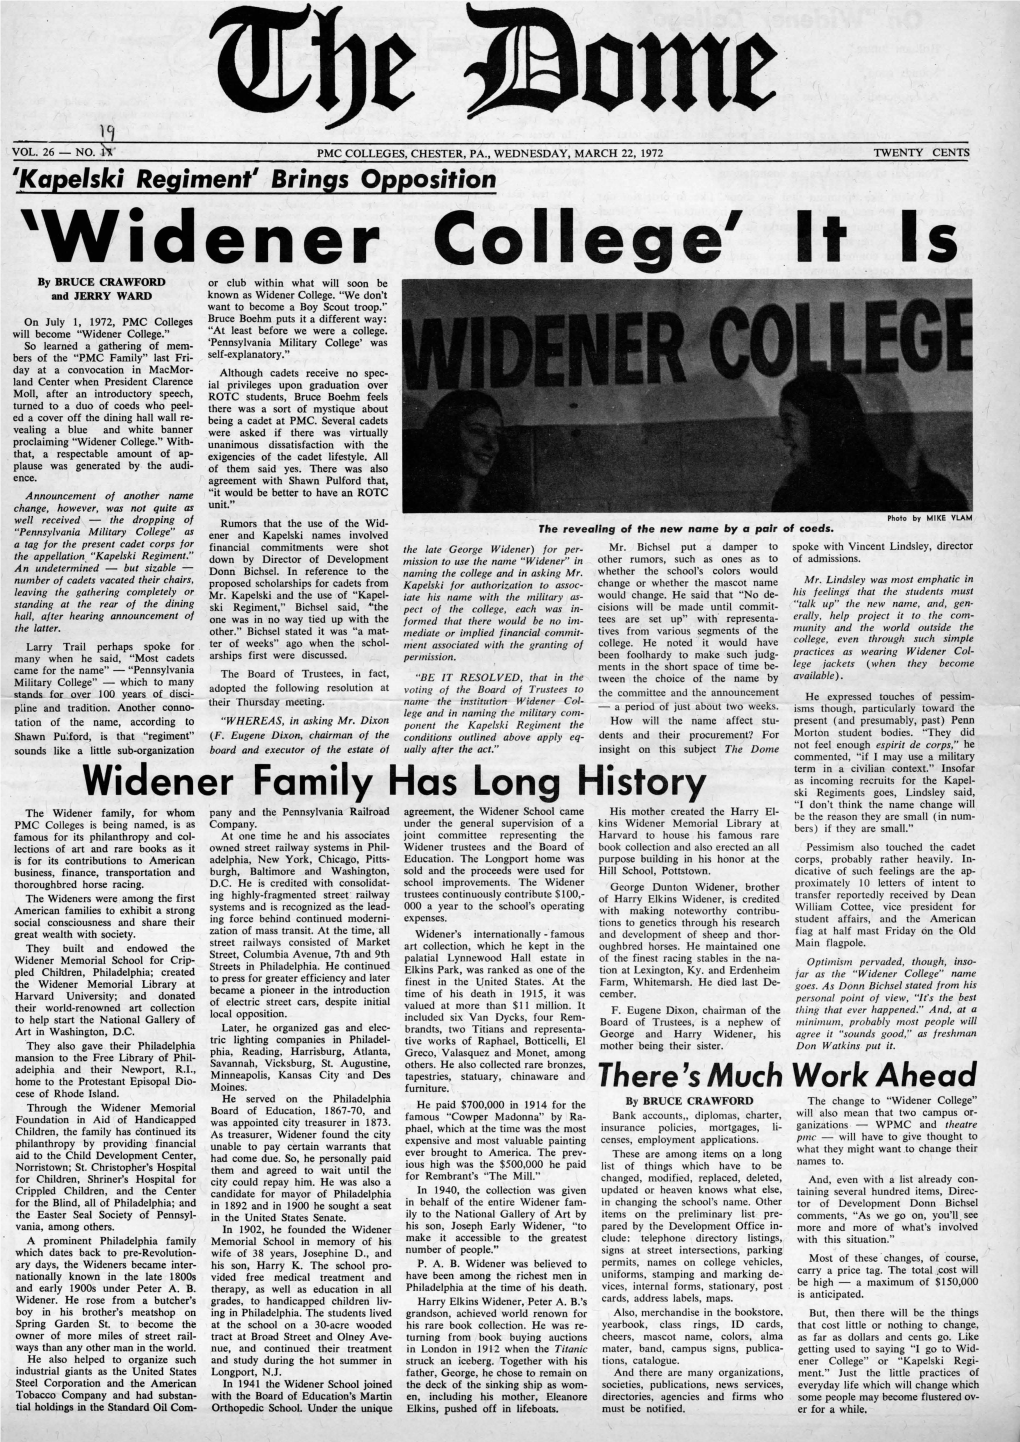 Widener Col'lege' It Is by BRUCE CRAWFORD Or Club Within What Will Soon Be and JERRY WARD Known As Widener College